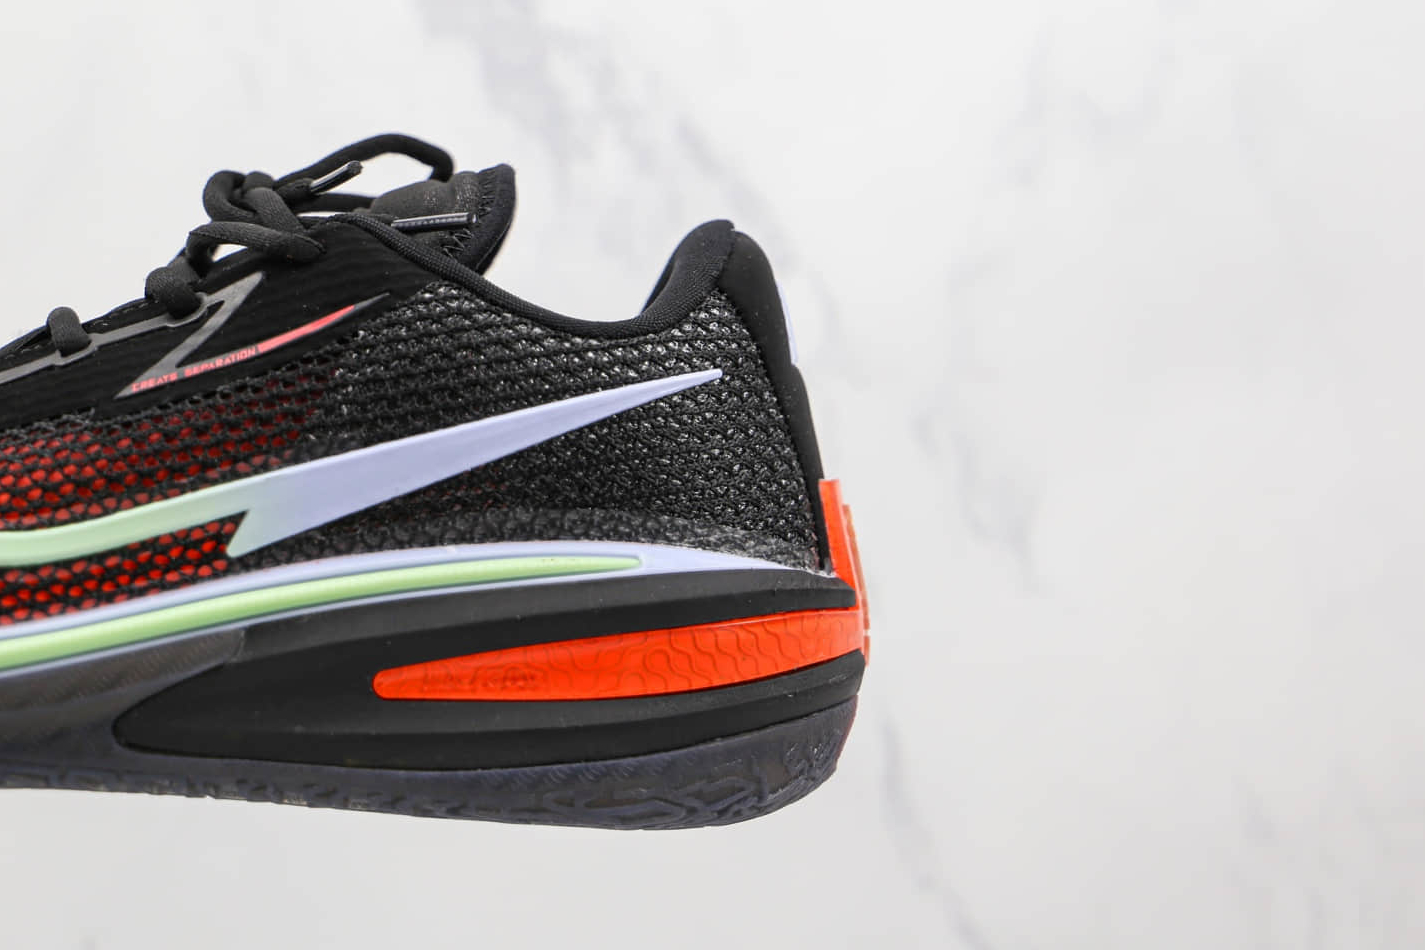 Nike Zoom G.T. Cut EF Black Hyper Crimson Green Red CZ0176-006 - Performance and Style in One Shoe